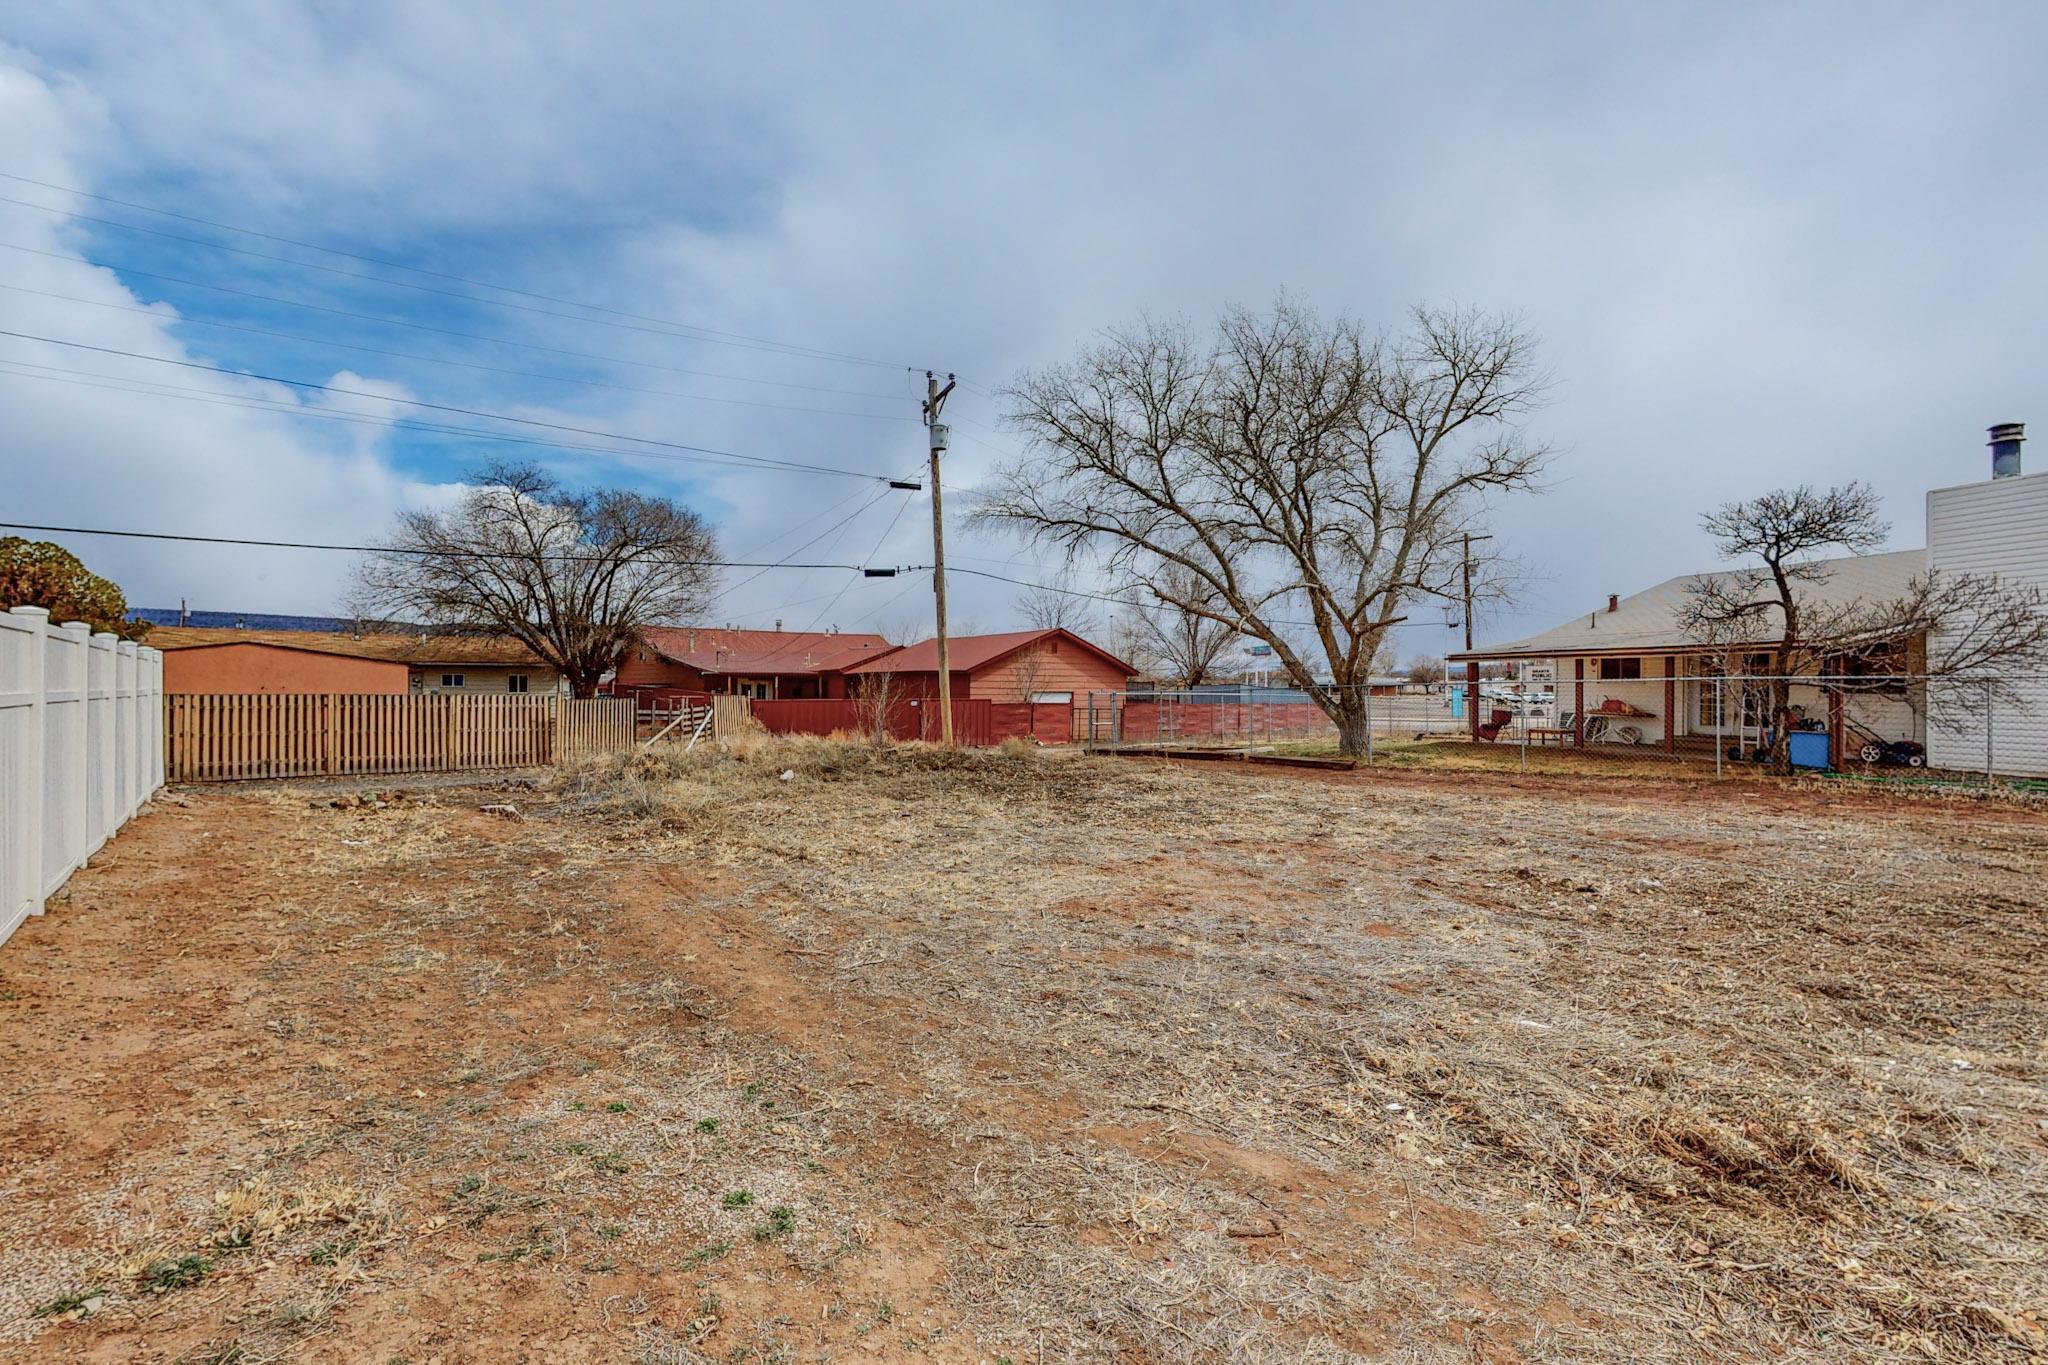 1204 N 3rd Street, Grants, New Mexico 87020, ,Land,For Sale,1204 N 3rd Street,1061320